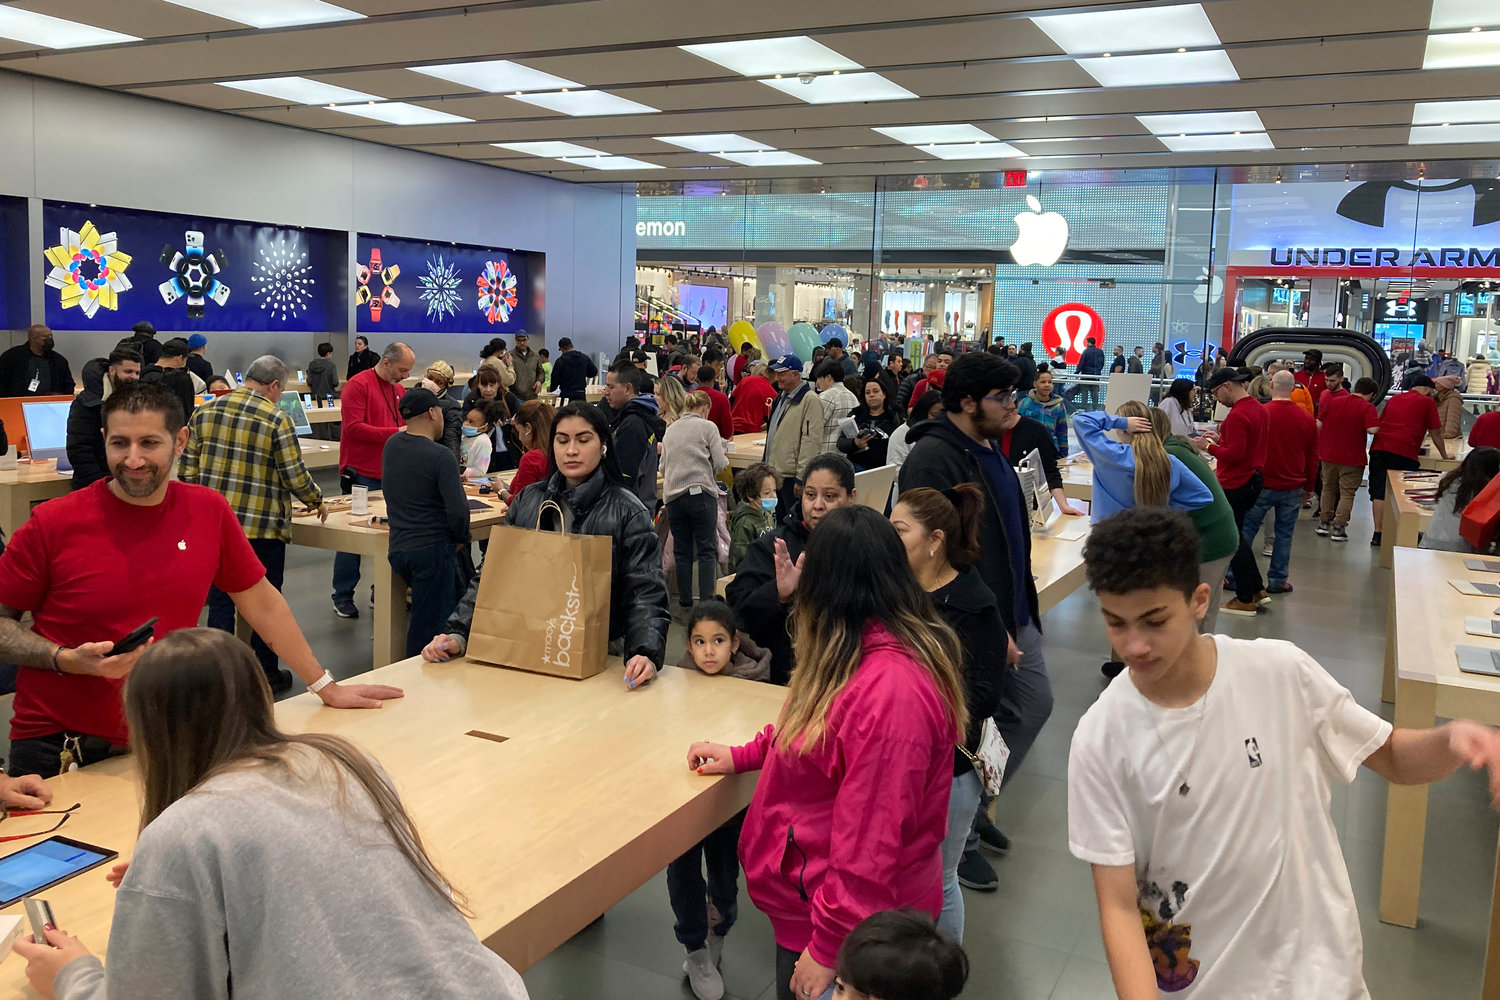 People shop at an Apple store in the Westfield Garden State Plaza mall in Paramus, New Jersey, on Saturday, December 17, 2022. On Wednesday, the Commerce Department releases U.S. retail sales data for December.